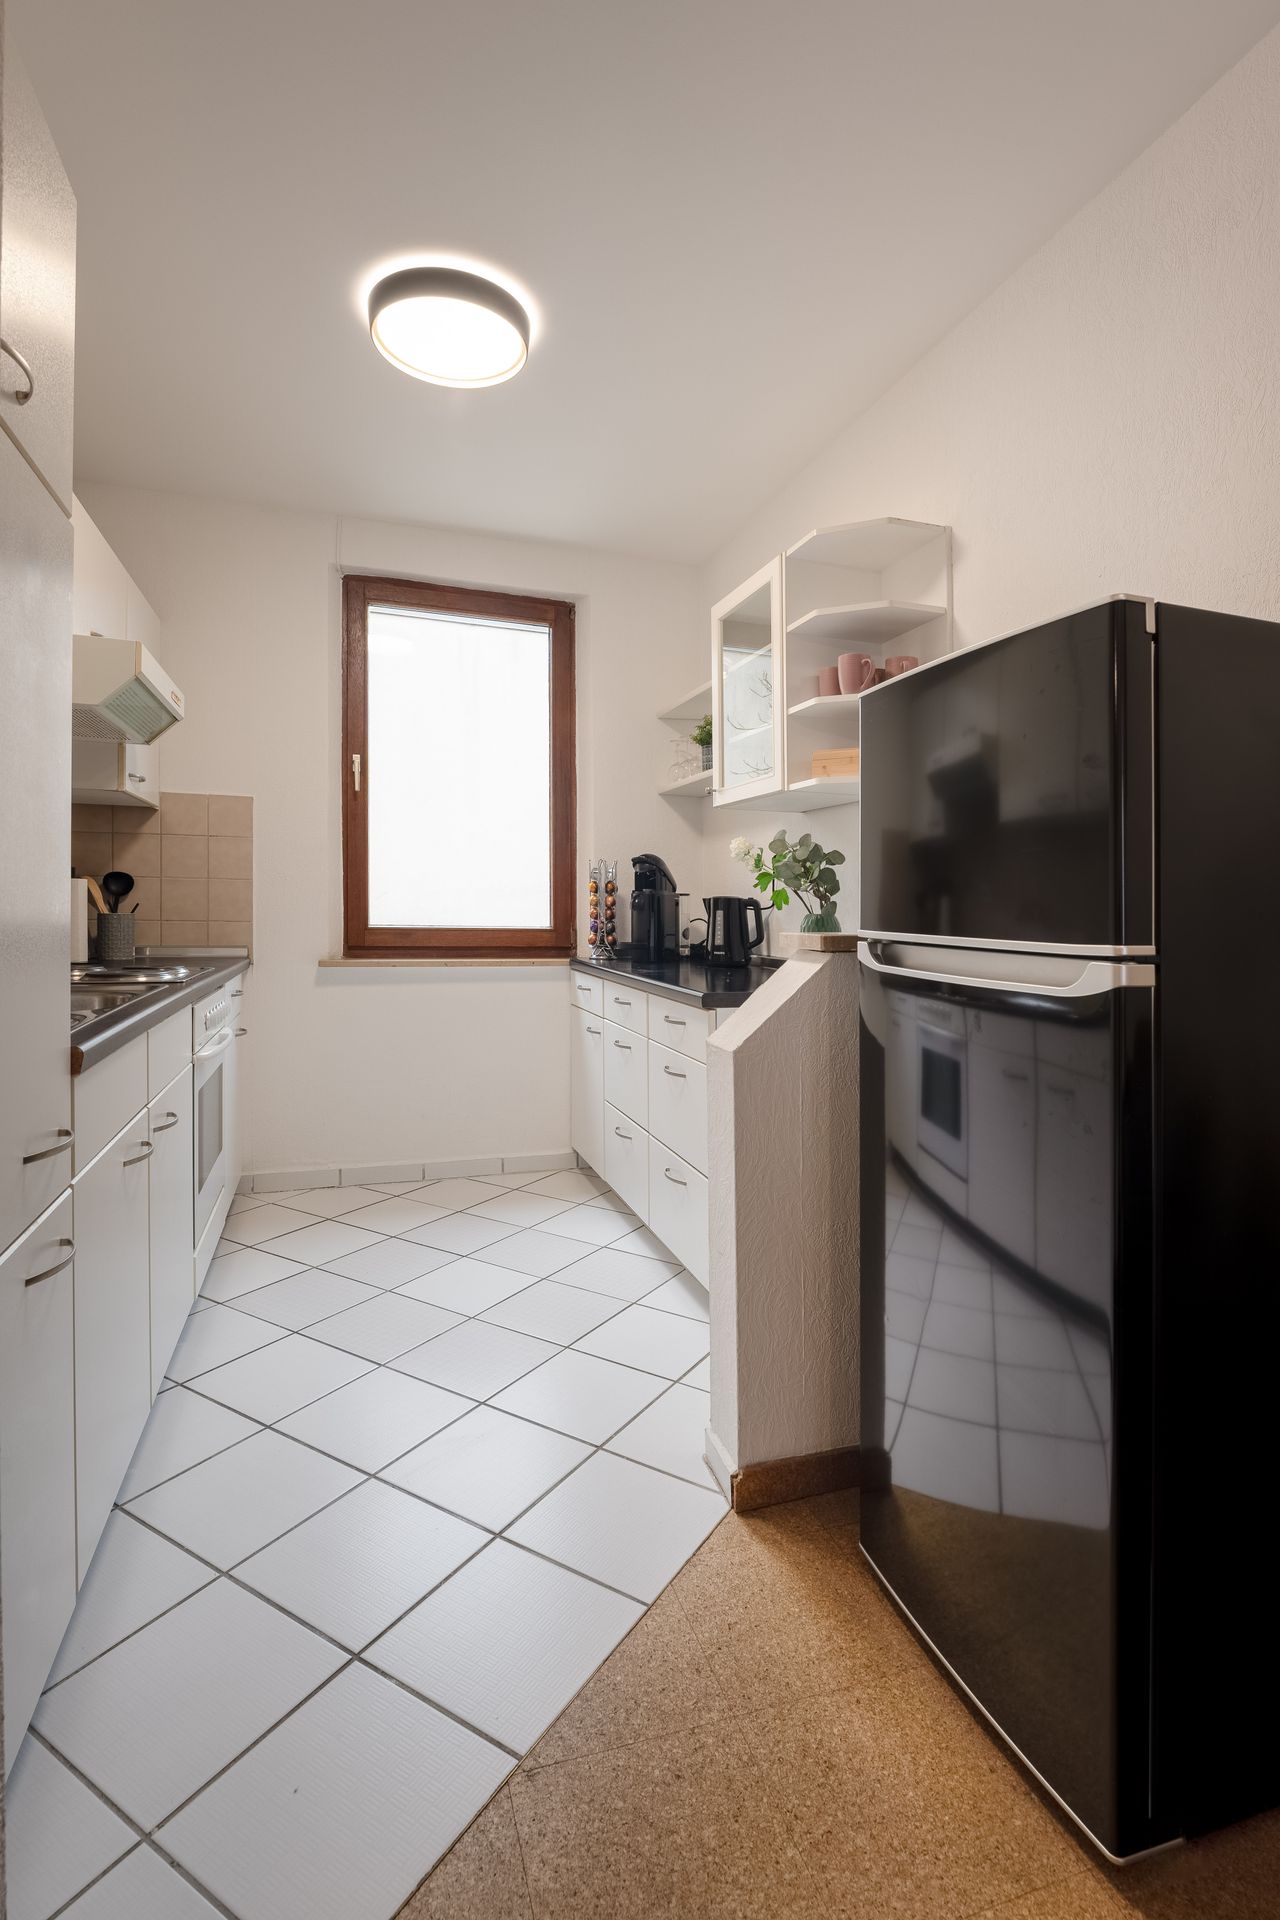 Friendly 2-room apartment centrally located between Stadtpark and Wöhrdersee